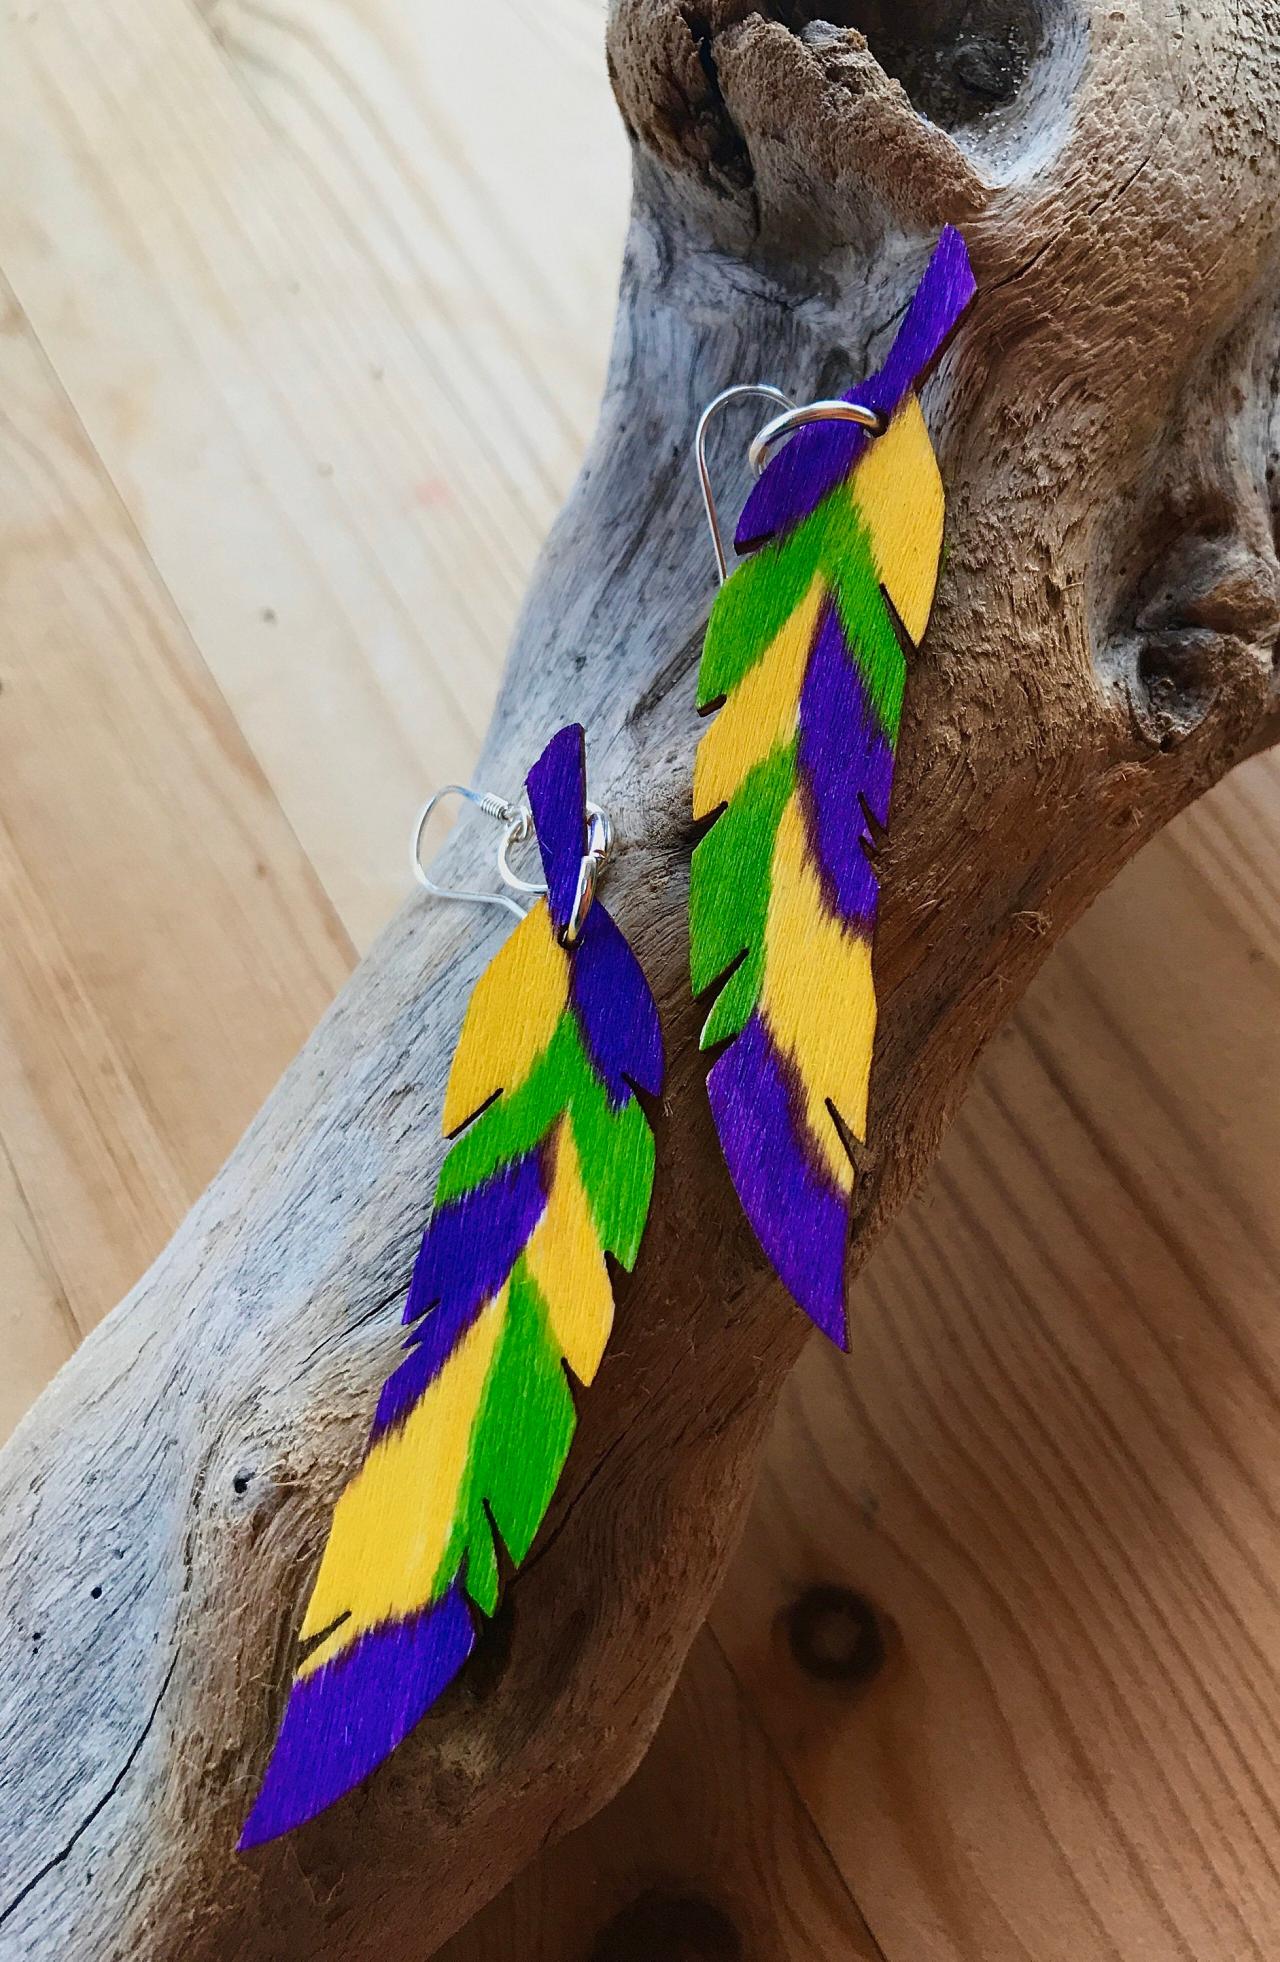 Pretty Boho Colourful Wooden Feather Earrings